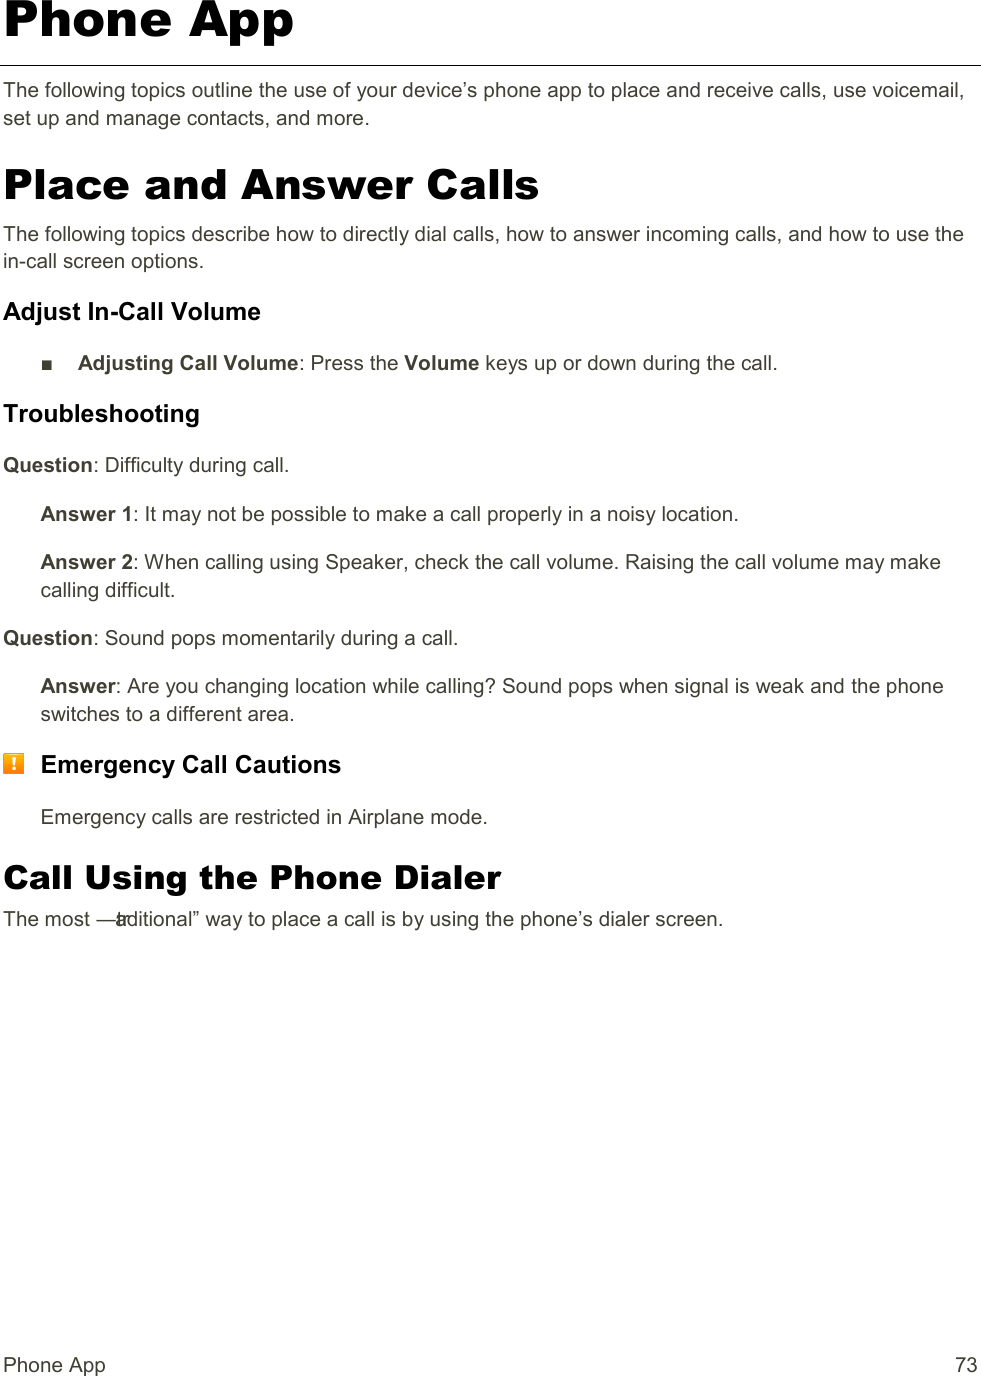 Phone App  73 Phone App The following topics outline the use of your device’s phone app to place and receive calls, use voicemail, set up and manage contacts, and more. Place and Answer Calls The following topics describe how to directly dial calls, how to answer incoming calls, and how to use the in-call screen options. Adjust In-Call Volume ■  Adjusting Call Volume: Press the Volume keys up or down during the call. Troubleshooting Question: Difficulty during call. Answer 1: It may not be possible to make a call properly in a noisy location. Answer 2: When calling using Speaker, check the call volume. Raising the call volume may make calling difficult. Question: Sound pops momentarily during a call. Answer: Are you changing location while calling? Sound pops when signal is weak and the phone switches to a different area.  Emergency Call Cautions Emergency calls are restricted in Airplane mode. Call Using the Phone Dialer The most ―traditional‖ way to place a call is by using the phone’s dialer screen.  